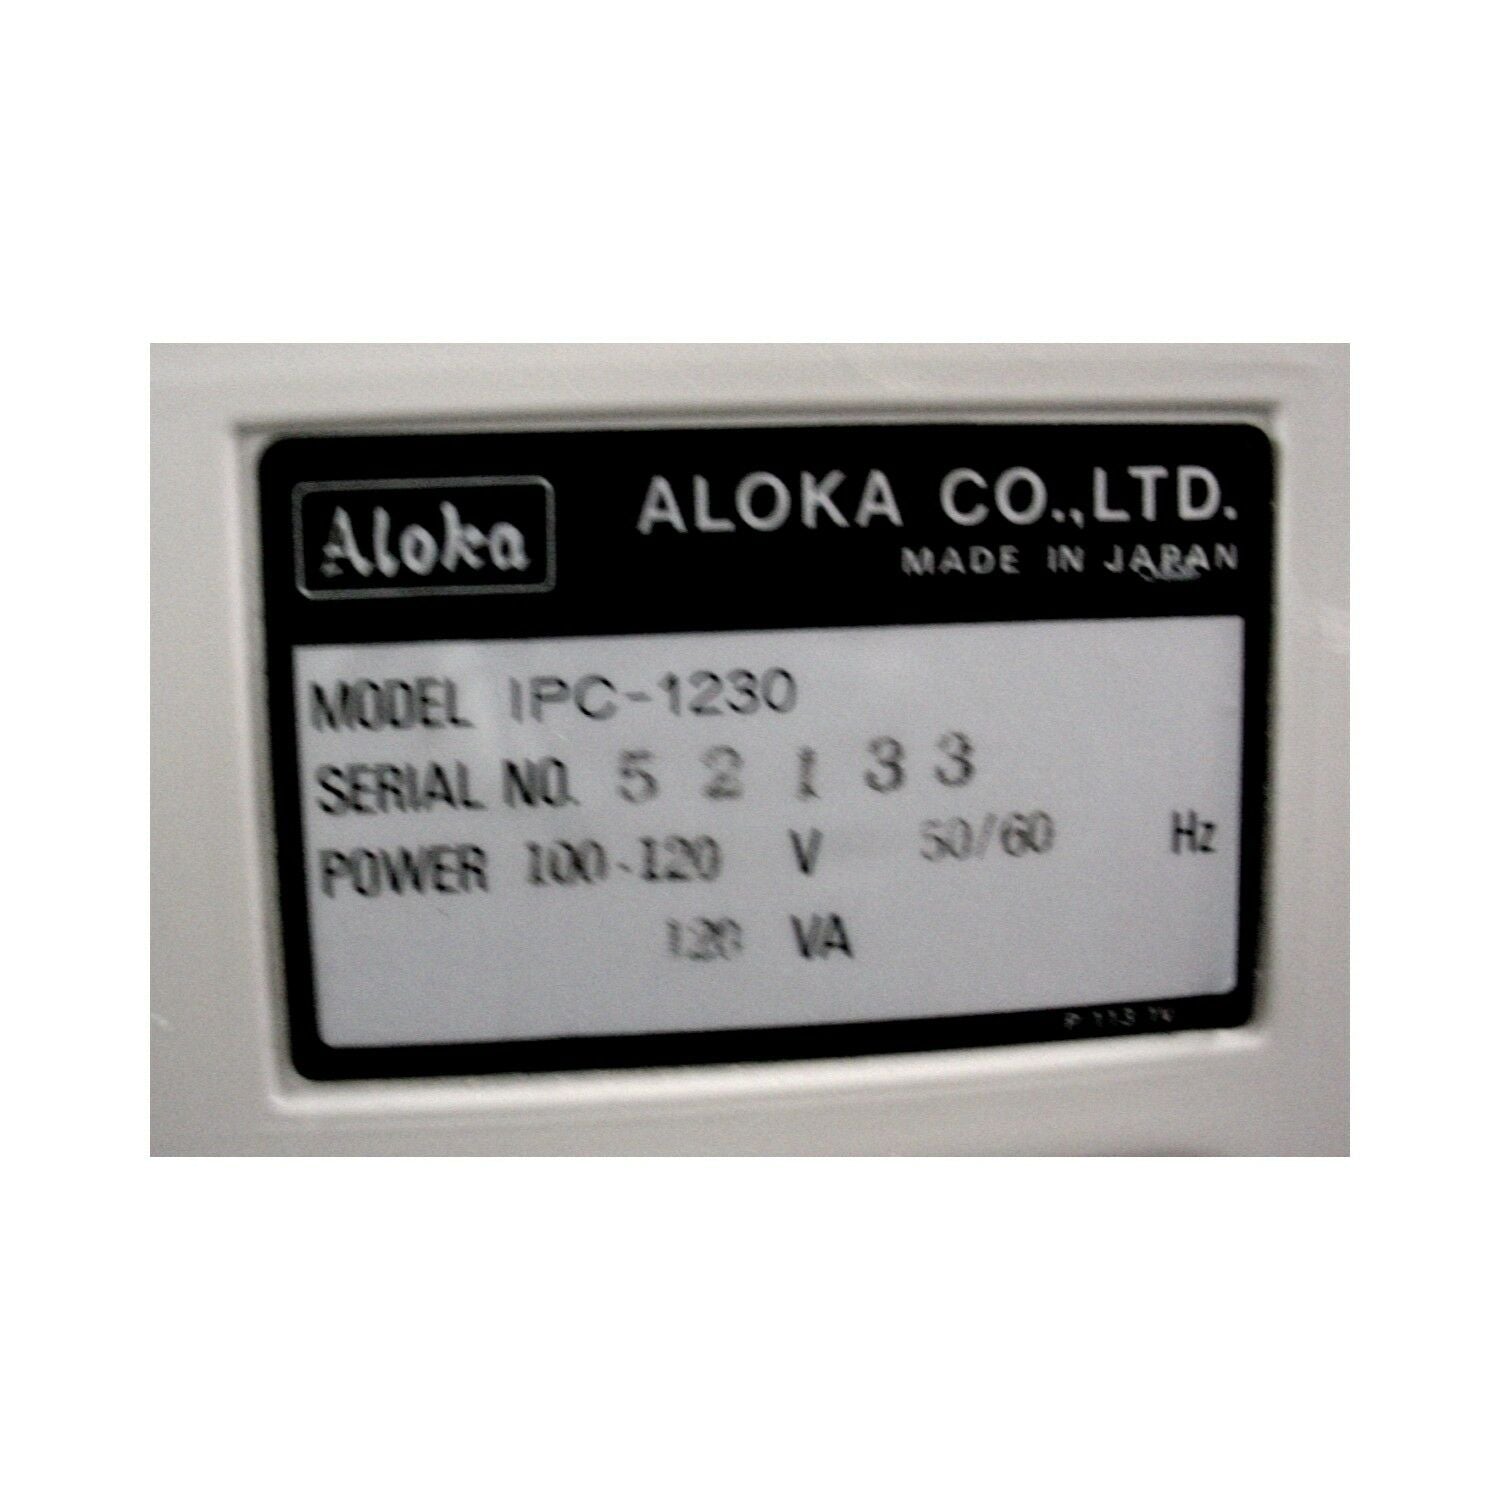 Aloka SSD-2000 2000DC Multiview Ultrasound w/ UST-979 & 995 Transducer Probes DIAGNOSTIC ULTRASOUND MACHINES FOR SALE